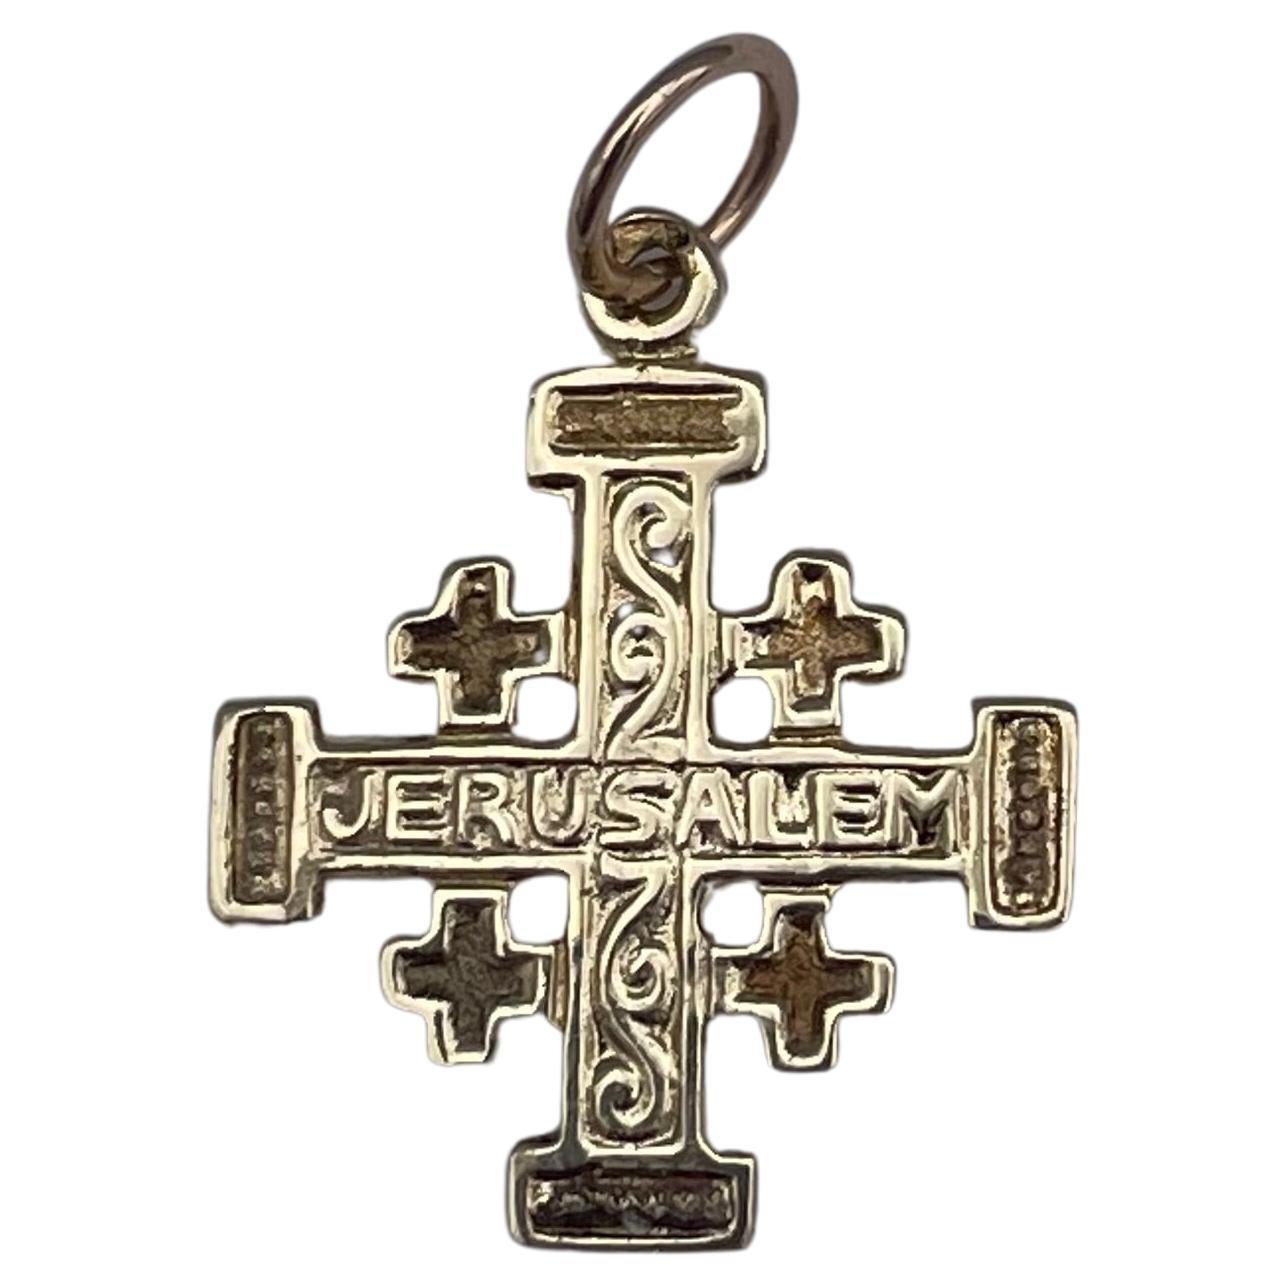 Sold at Auction: Pair Of 14K Yellow Gold Jerusalem Cross Earrings